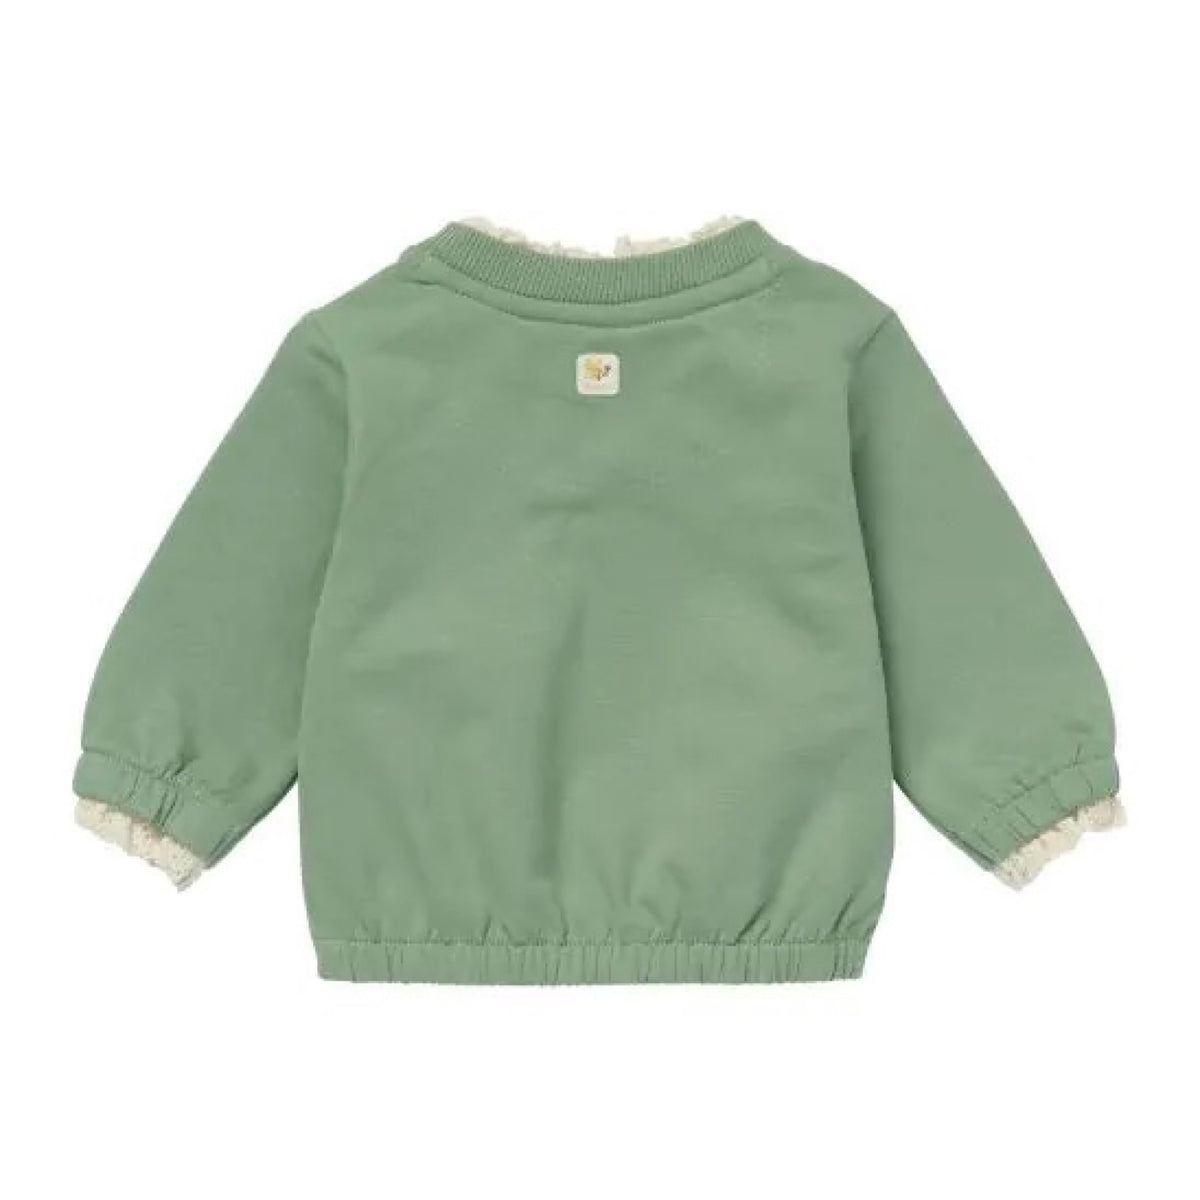 Green Sweatshirt with Embroidery Detailing